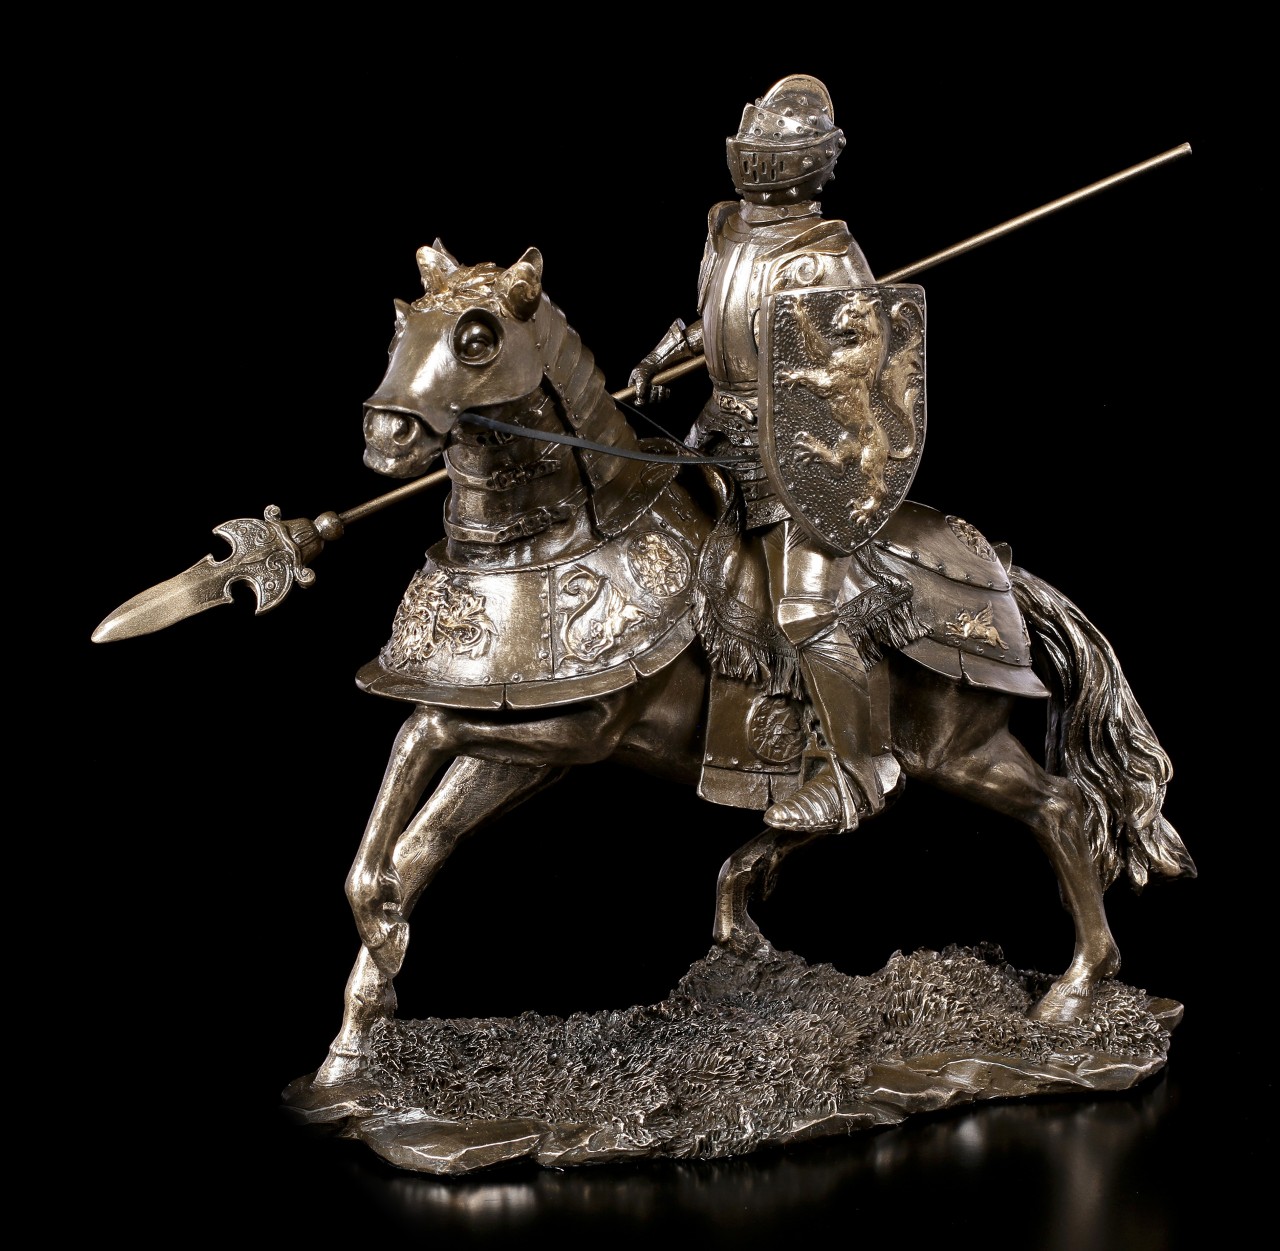 Knight Figurine on Horse with Lance - bronzed